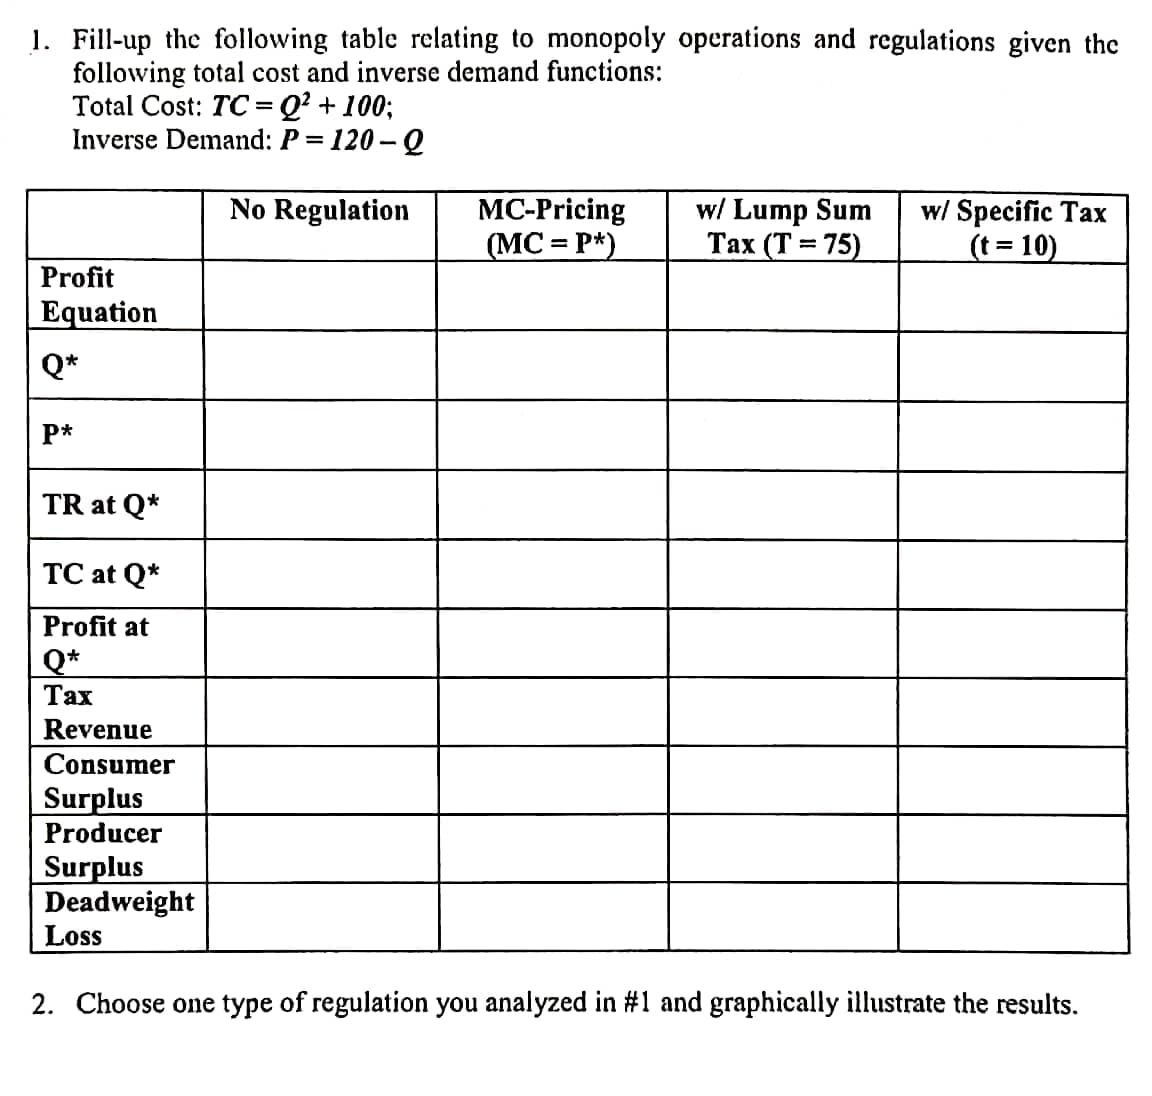 1. Fill-up the following table relating to monopoly operations and regulations given the
following total cost and inverse demand functions:
Total Cost: TC=Q? + 100;
Inverse Demand: P = 120 – Q
MC-Pricing
(MC = P*)
No Regulation
w/ Lump Sum
Таx (Т %3D 75)
w/ Specific Tax
(t = 10)
Profit
Equation
Q*
P*
TR at Q*
ТC at Q*
Profit at
Q*
Тах
Revenue
Consumer
Surplus
Producer
Surplus
Deadweight
Loss
2. Choose one type of regulation you analyzed in #1 and graphically illustrate the results.
